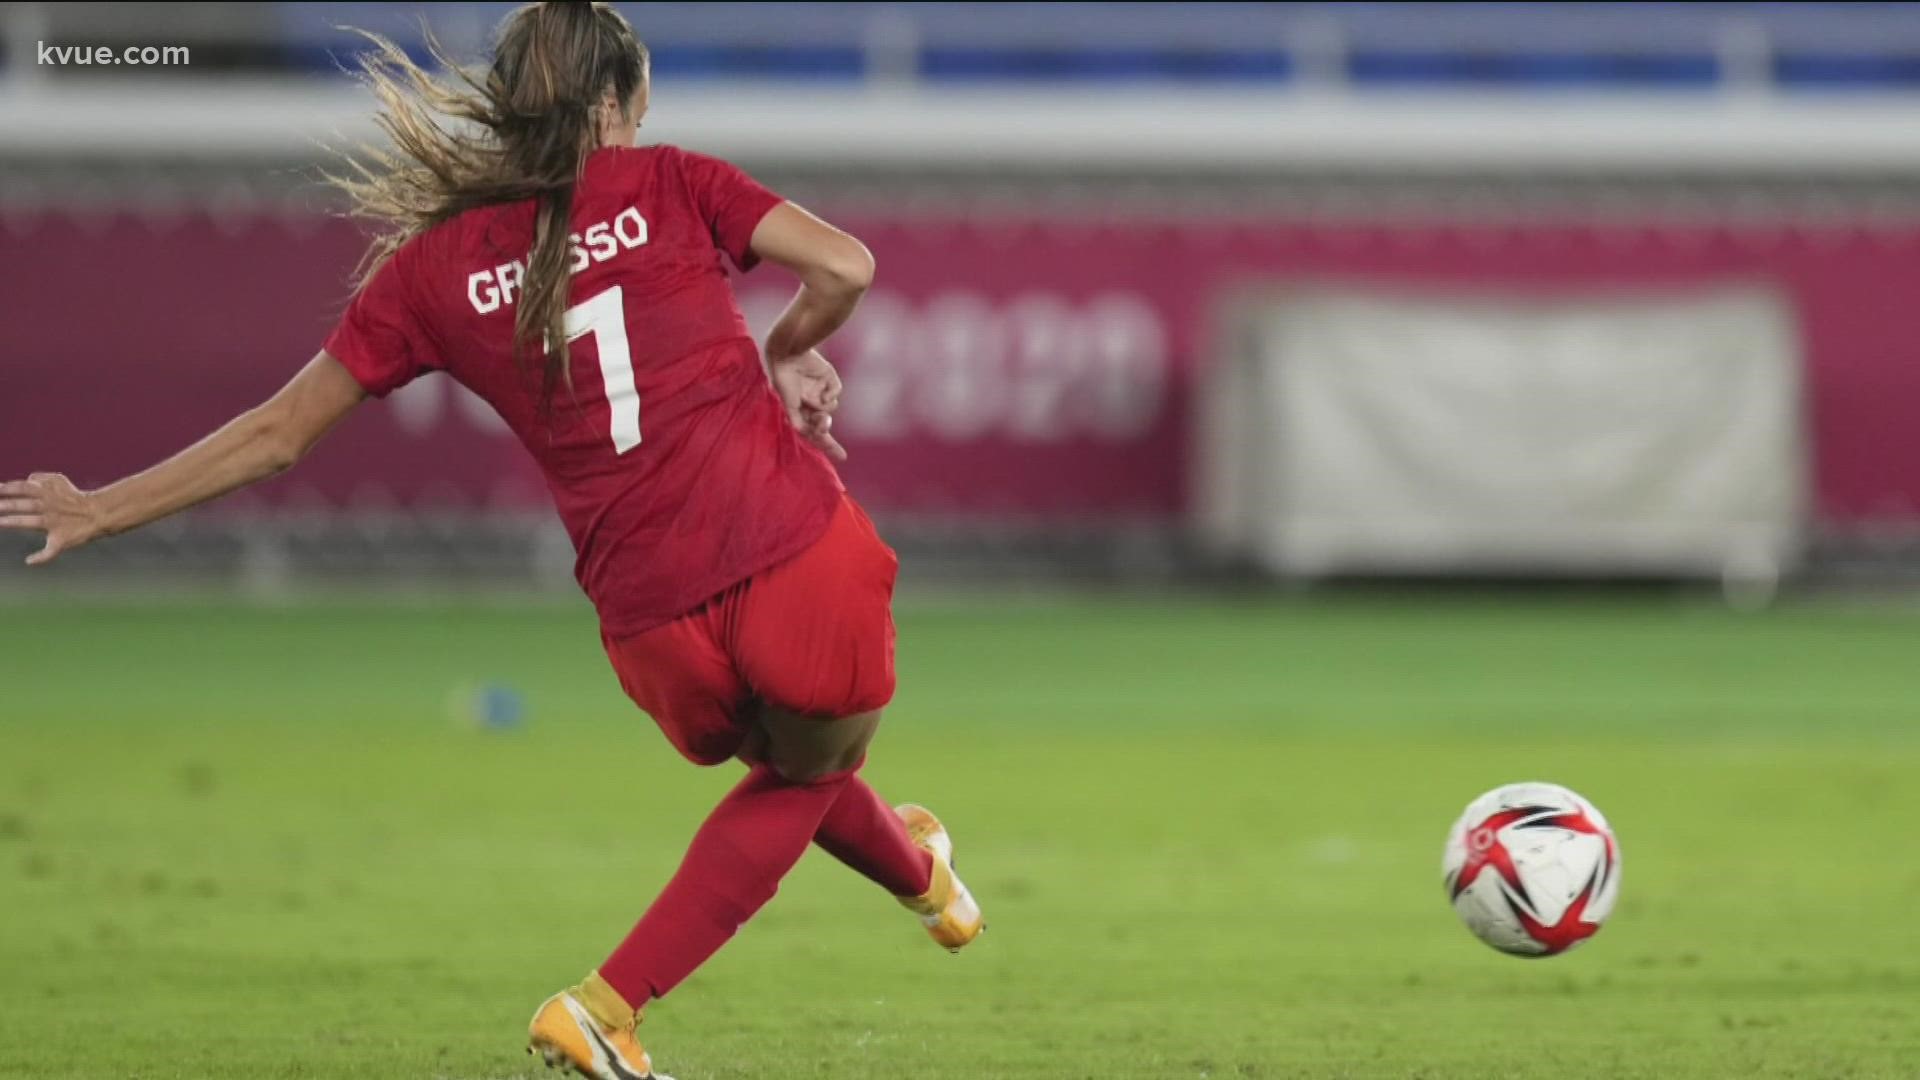 Grosso scored the winning penalty kick in the women’s soccer finals on Day 14 of the 2020 Tokyo Olympics.